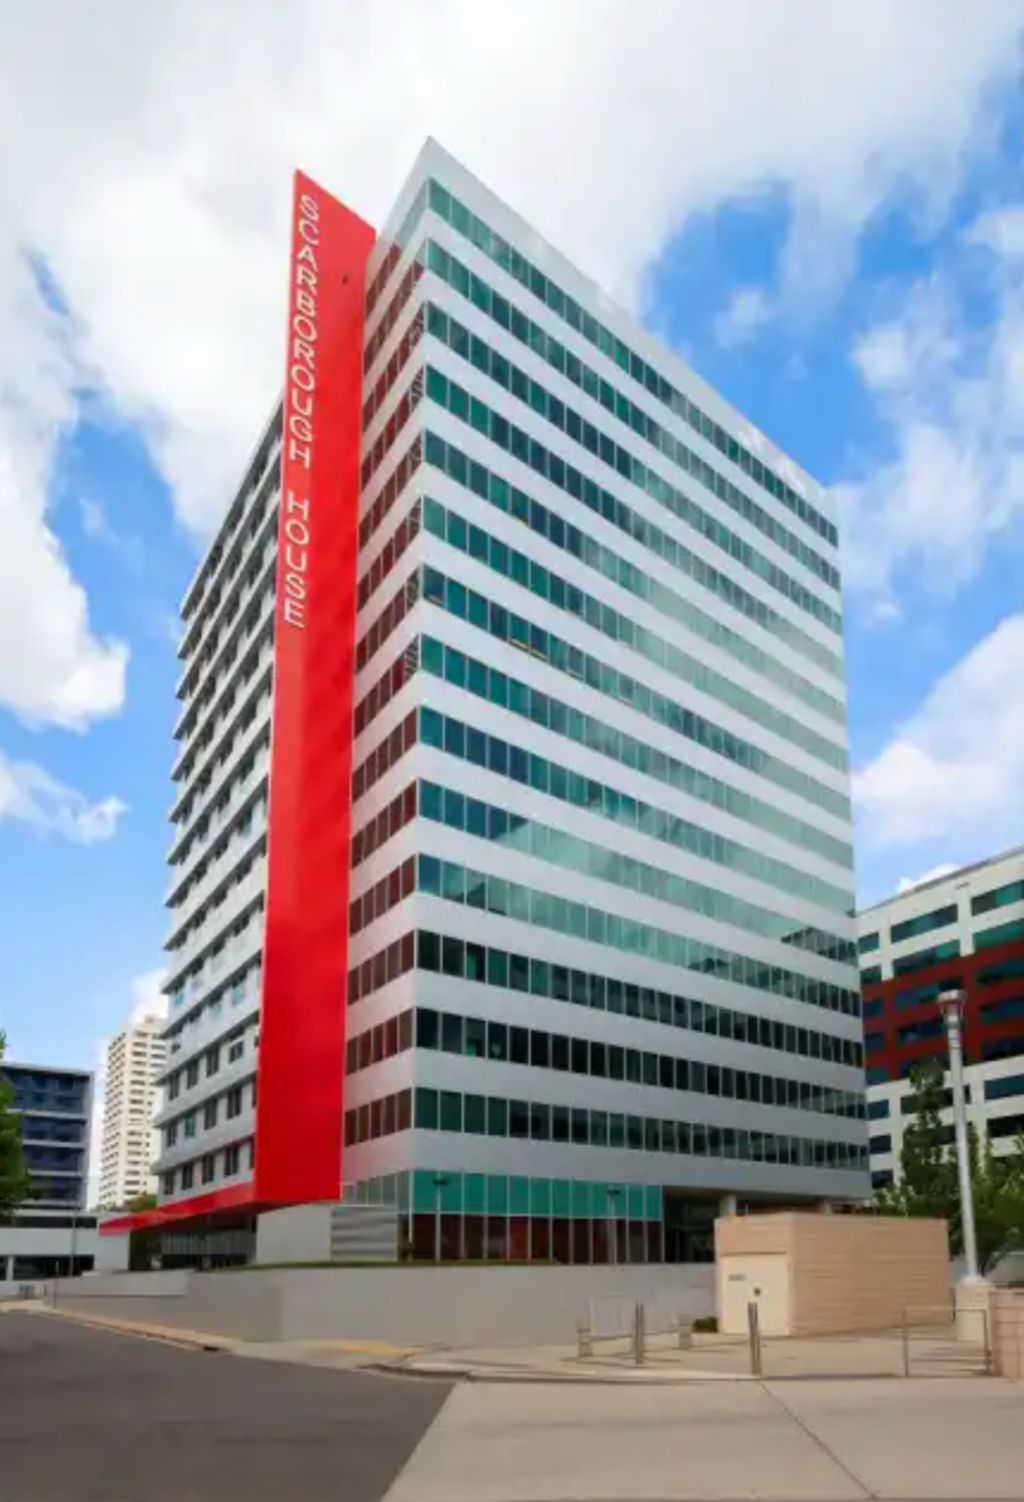 Centuria wants $80 million for Canberra office tower